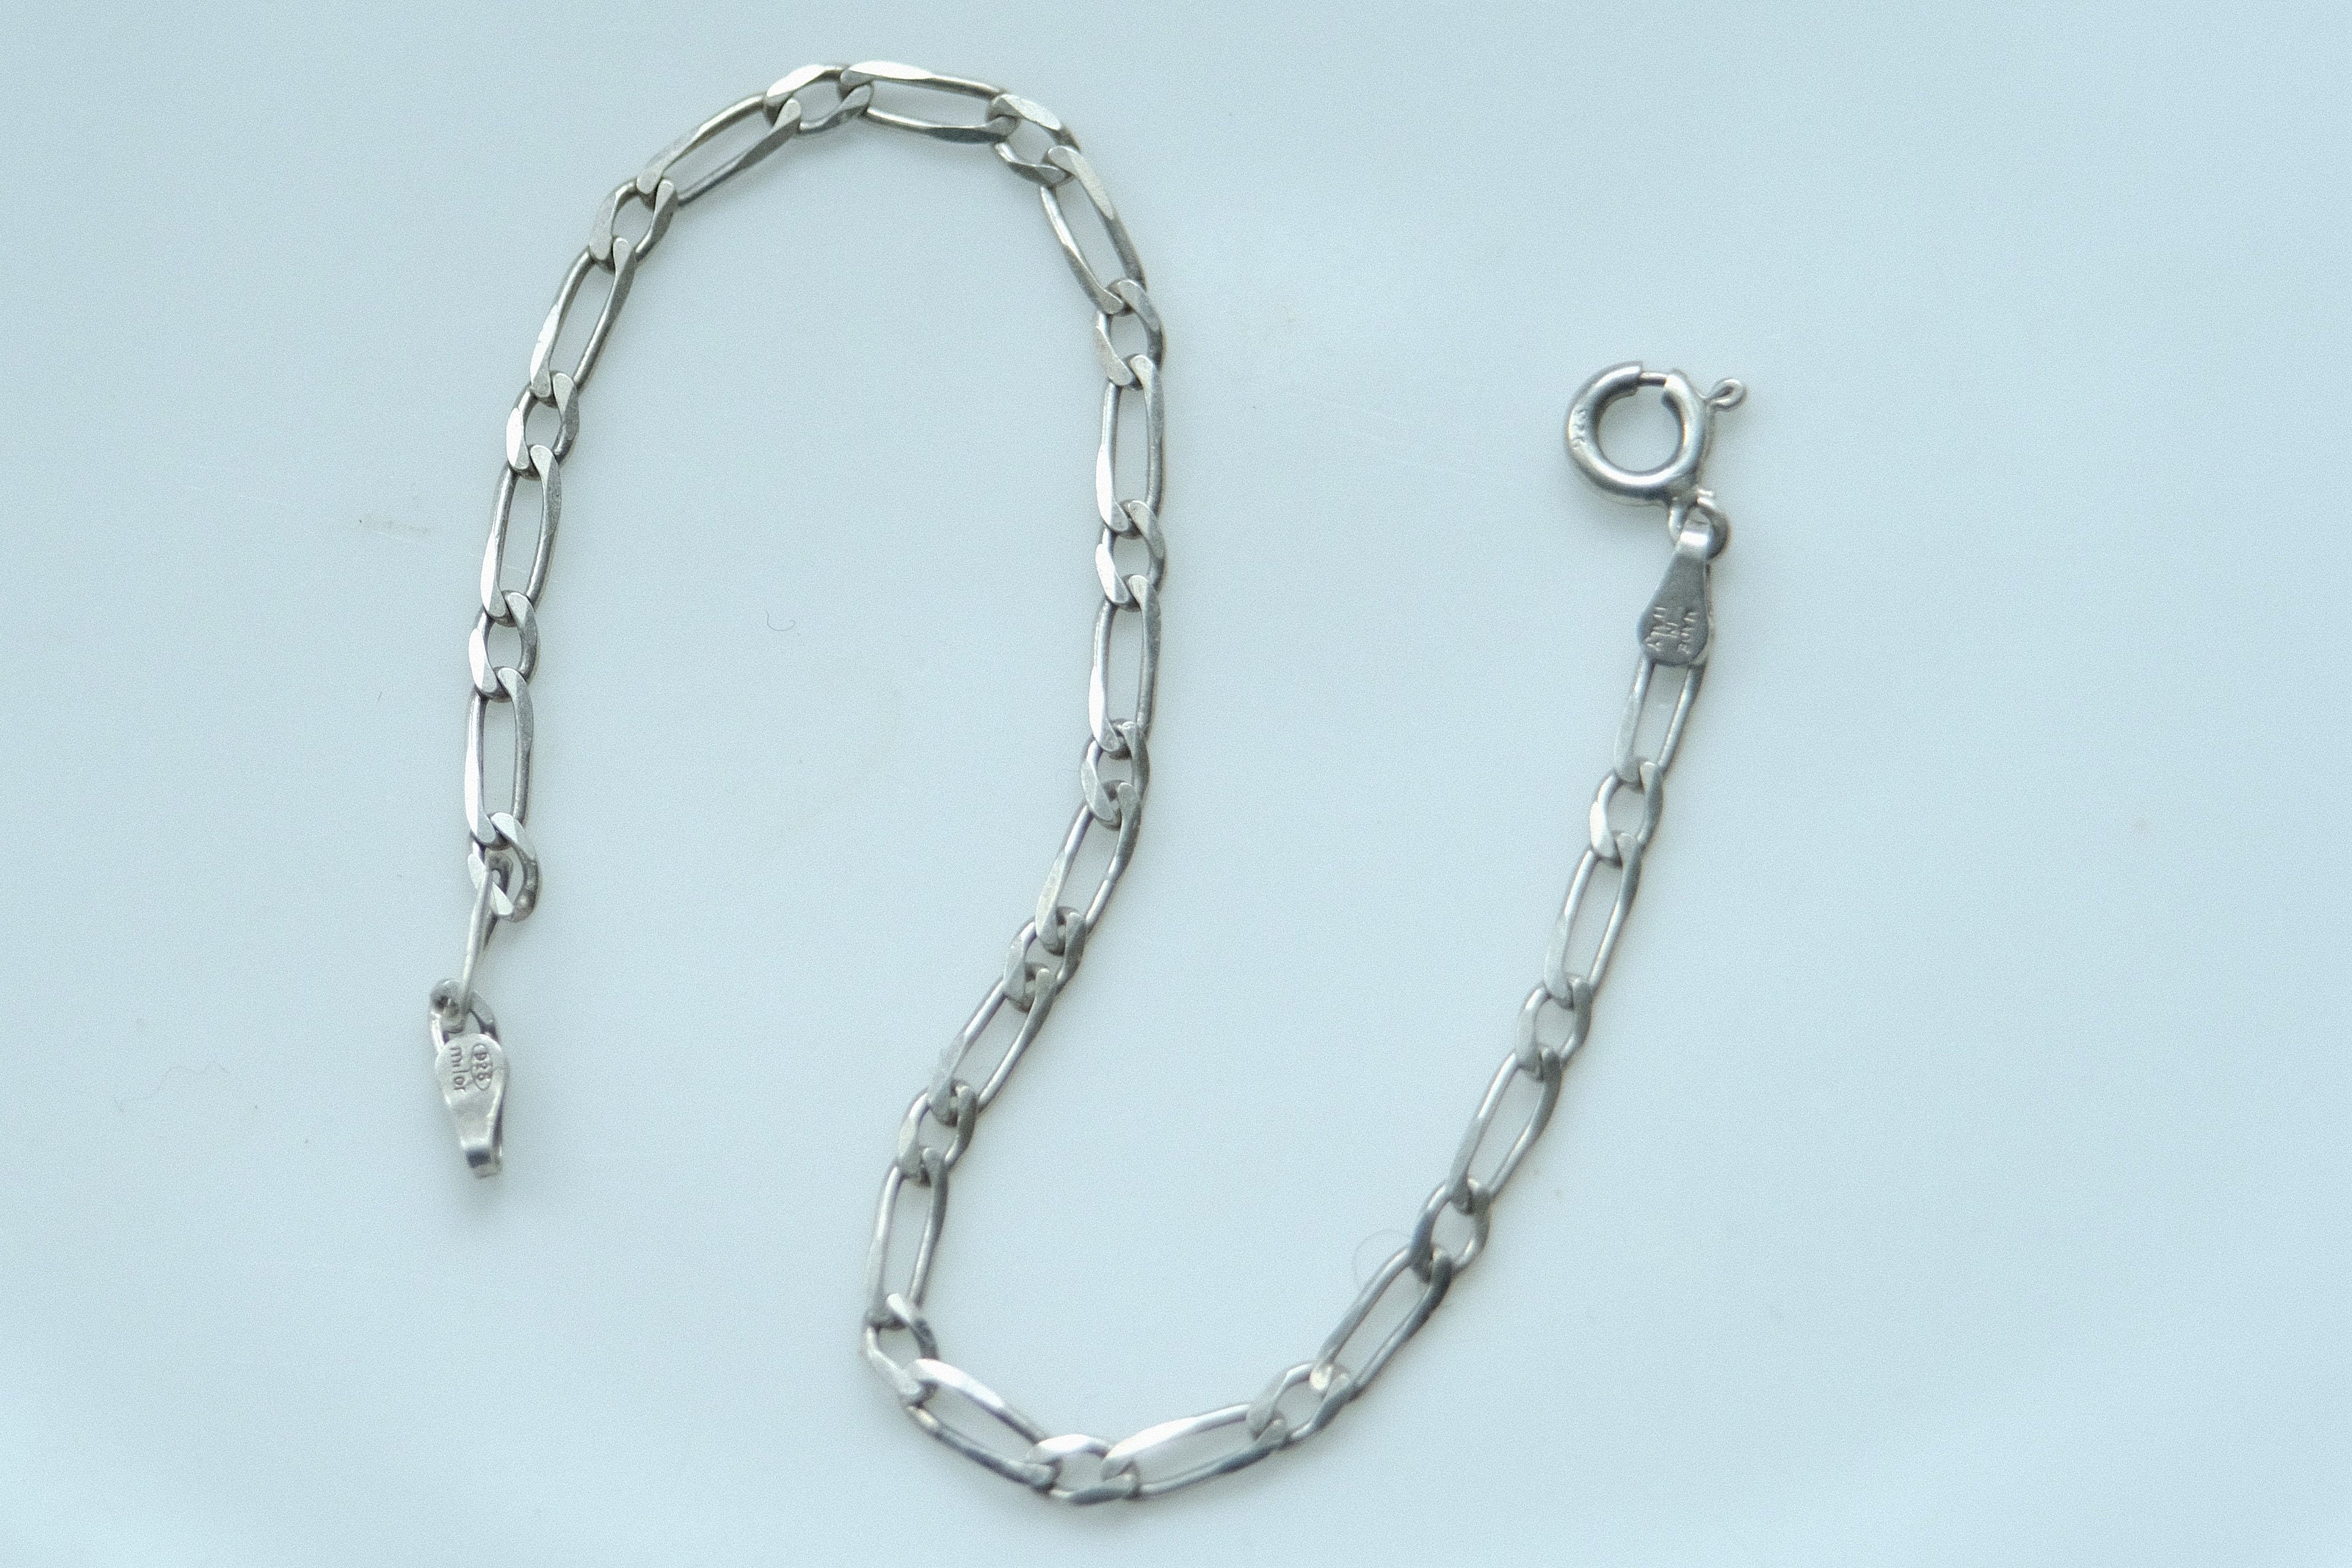 Sterling Silver Snake Chain Bracelet Finished Snake Chain 2.5mm Unisex  Lobster Clasp 7.75-inch Length BSN803 